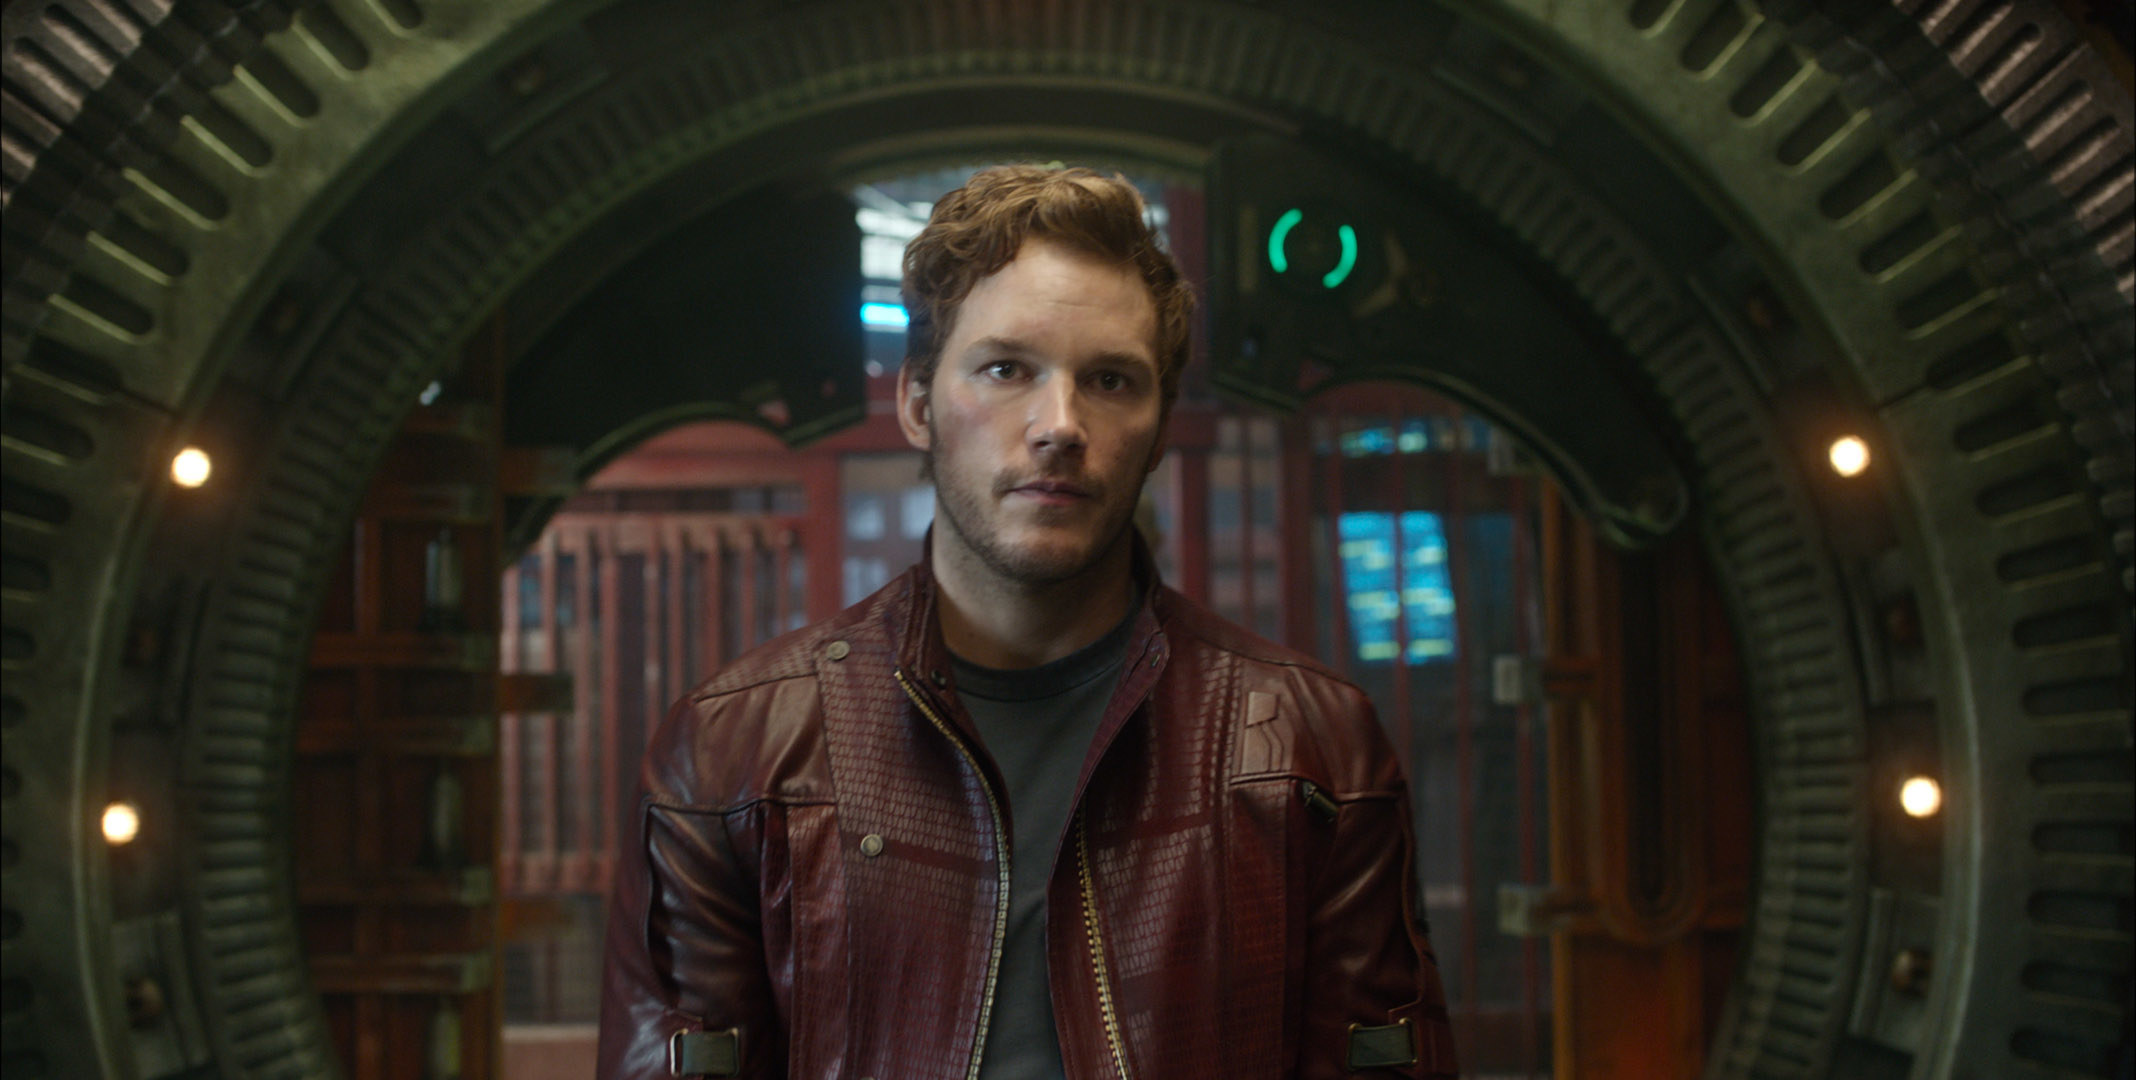 Chris Pratt in a red leather jacket as Star Lord